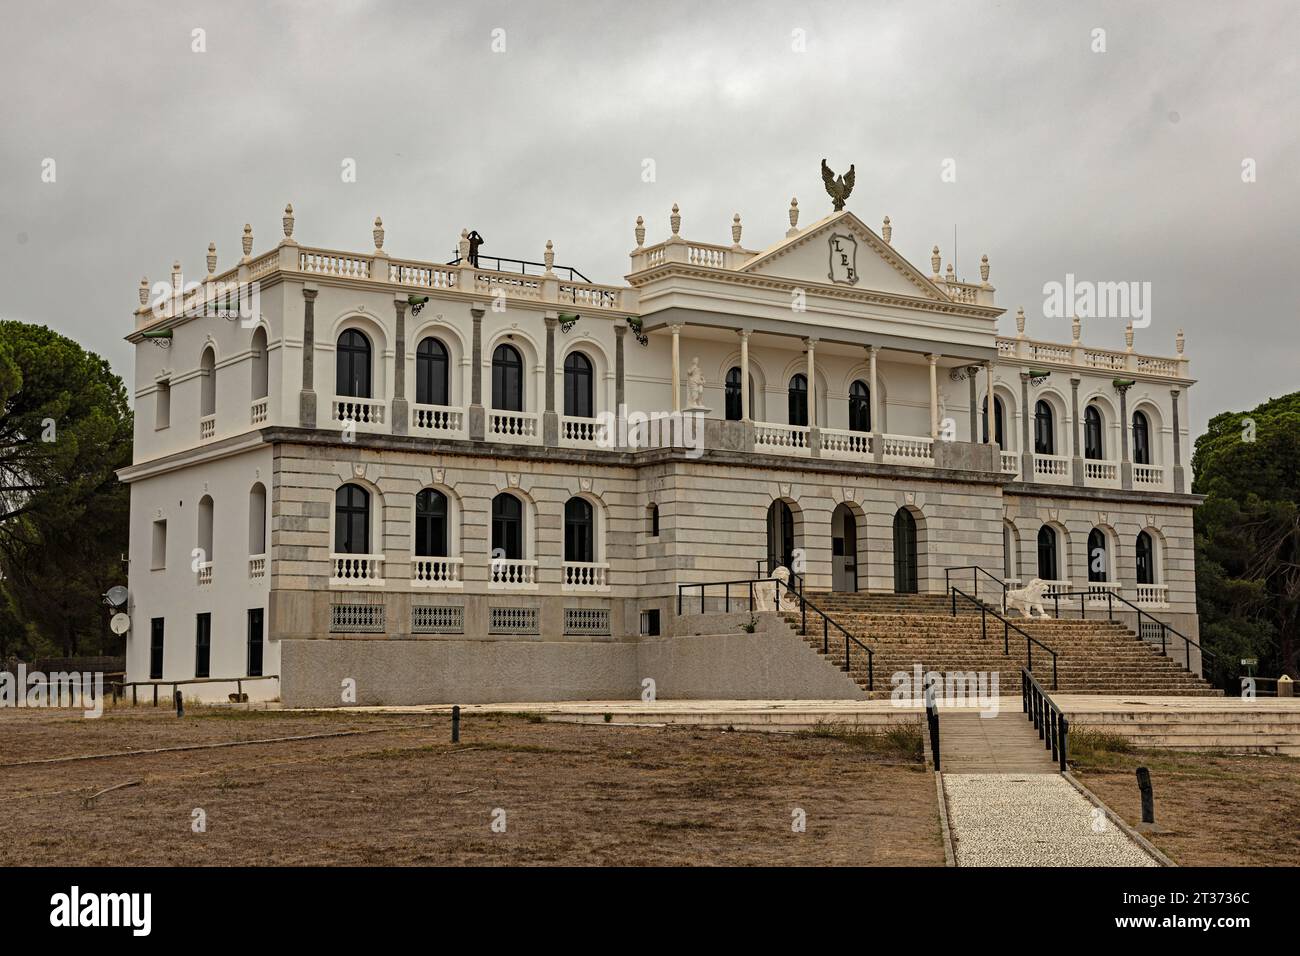 Acebron palace in the Donana national park near El Rocio in Andalusia Stock Photo